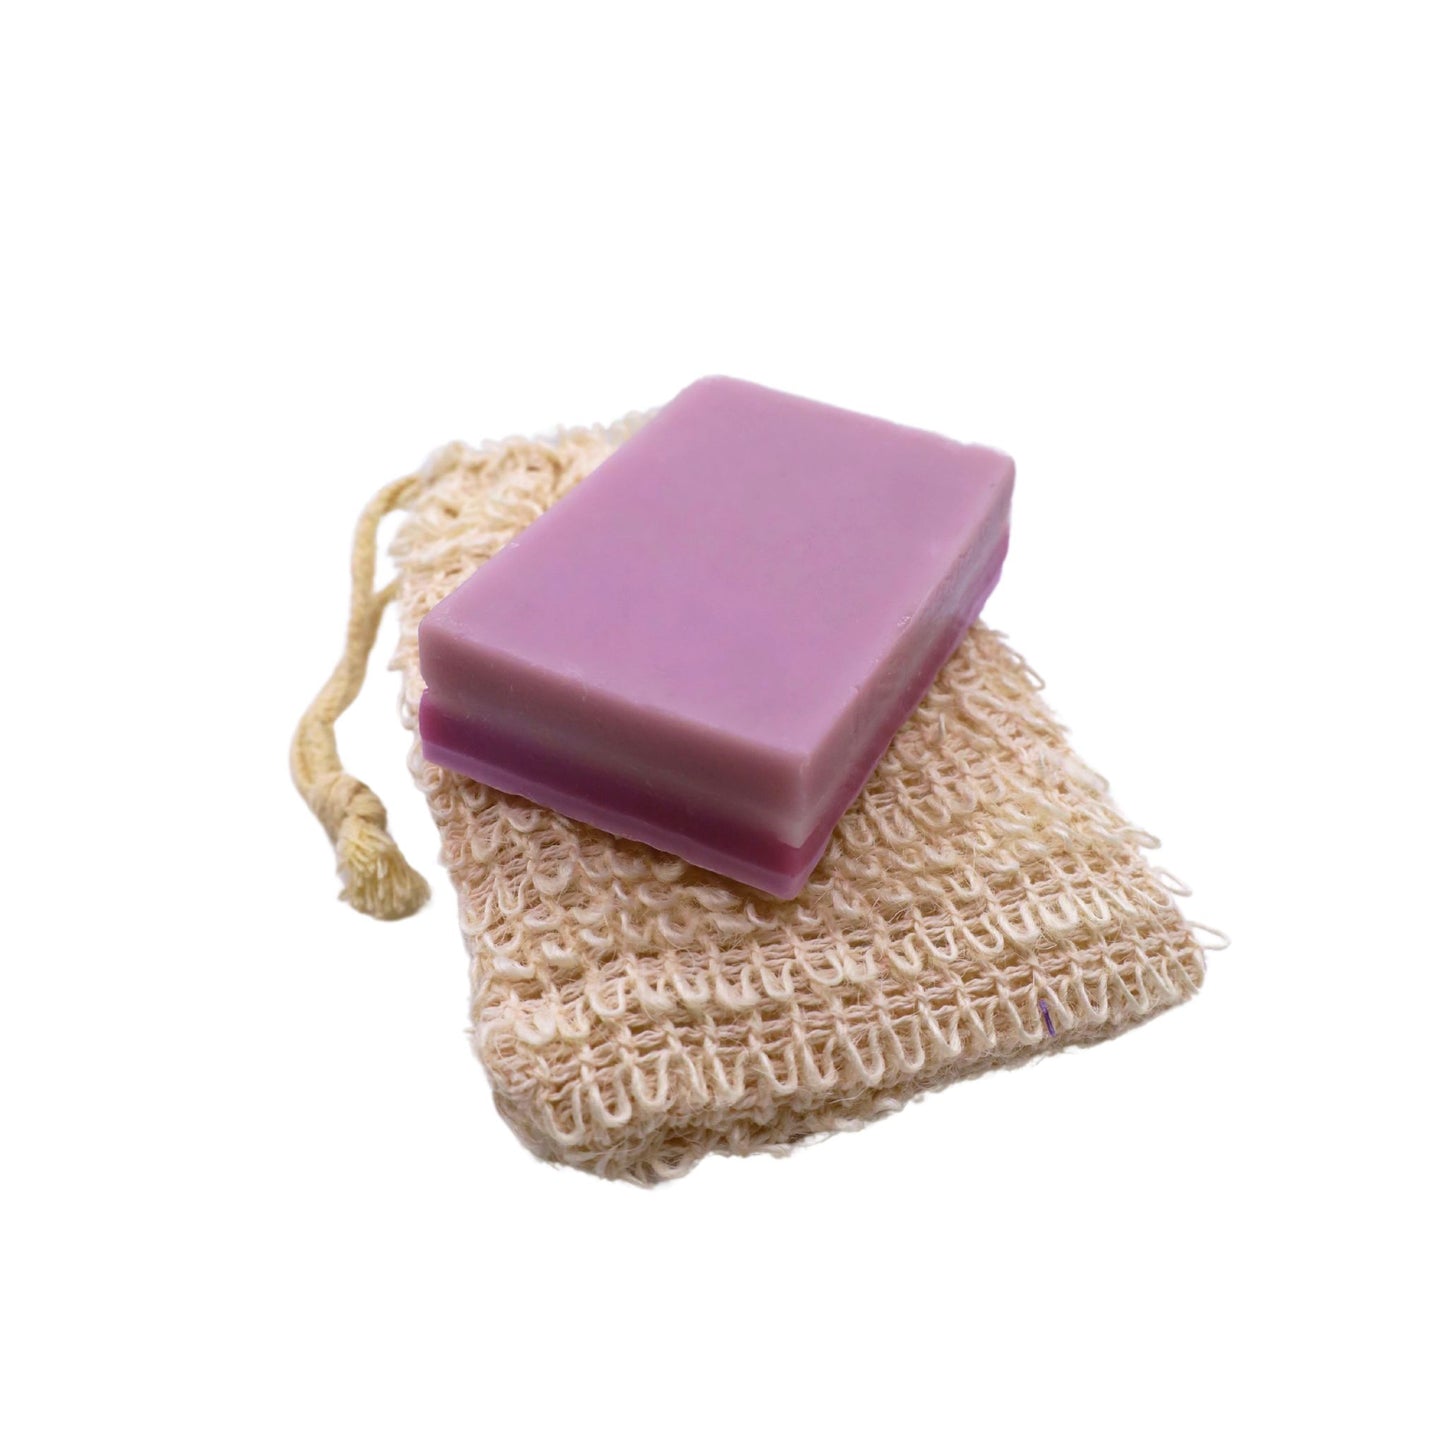 A bar of premium CBD bar soap sitting on top of a hemp made loofah bag sitting on a white background.